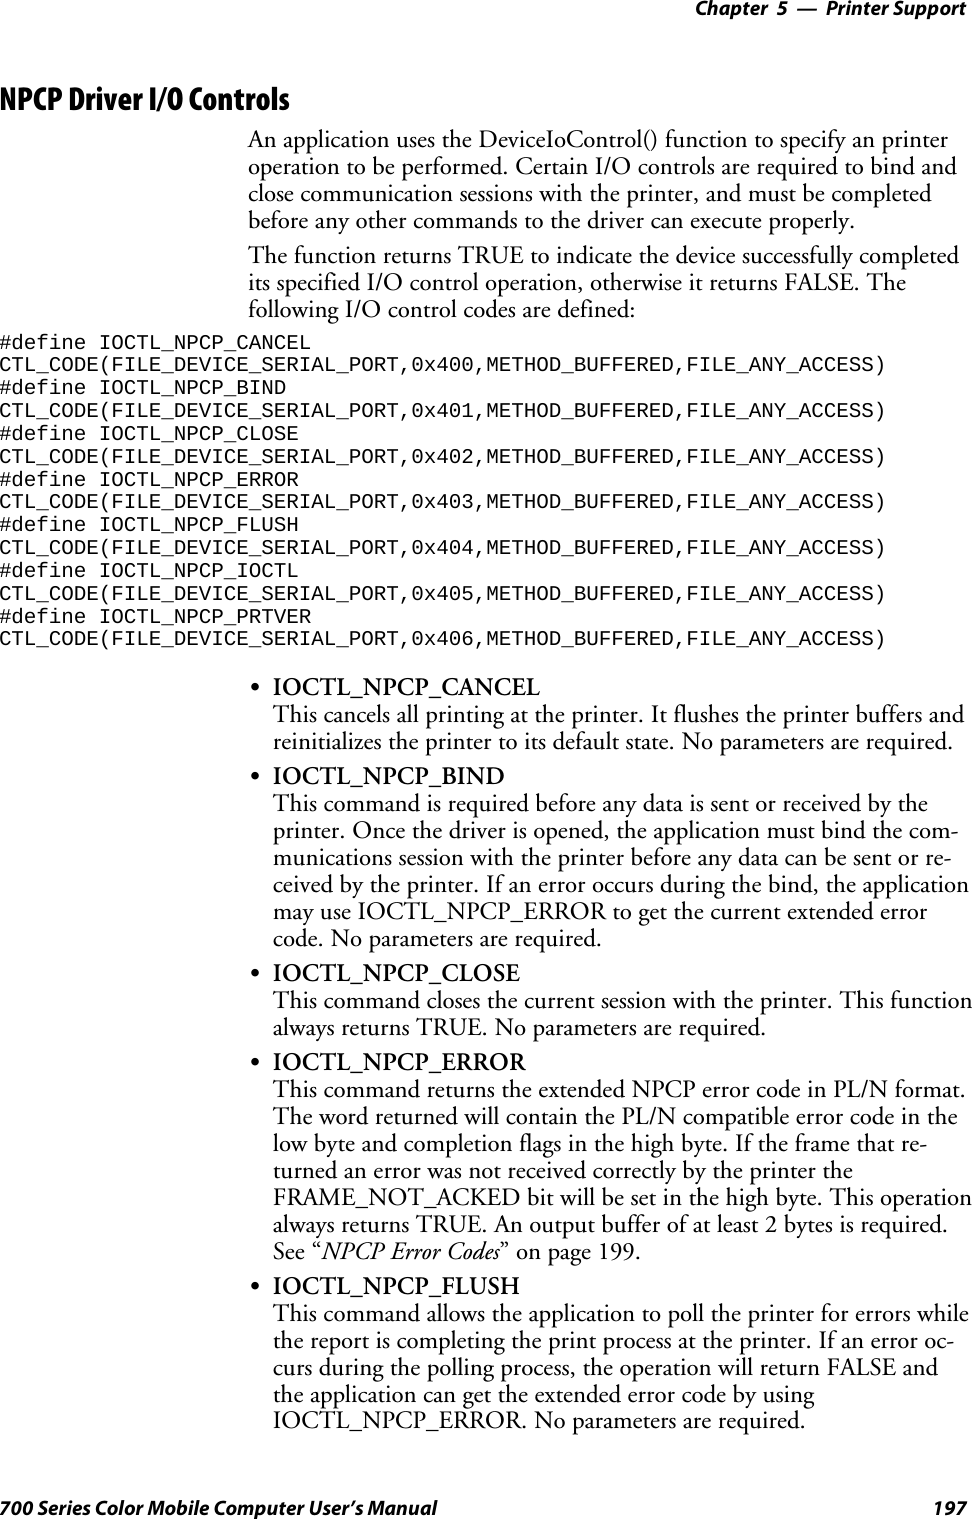 Printer Support—Chapter 5197700 Series Color Mobile Computer User’s ManualNPCP Driver I/O ControlsAn application uses the DeviceIoControl() function to specify an printeroperation to be performed. Certain I/O controls are required to bind andclose communication sessions with the printer, and must be completedbefore any other commands to the driver can execute properly.The function returns TRUE to indicate the device successfully completedits specified I/O control operation, otherwise it returns FALSE. Thefollowing I/O control codes are defined:#define IOCTL_NPCP_CANCELCTL_CODE(FILE_DEVICE_SERIAL_PORT,0x400,METHOD_BUFFERED,FILE_ANY_ACCESS)#define IOCTL_NPCP_BINDCTL_CODE(FILE_DEVICE_SERIAL_PORT,0x401,METHOD_BUFFERED,FILE_ANY_ACCESS)#define IOCTL_NPCP_CLOSECTL_CODE(FILE_DEVICE_SERIAL_PORT,0x402,METHOD_BUFFERED,FILE_ANY_ACCESS)#define IOCTL_NPCP_ERRORCTL_CODE(FILE_DEVICE_SERIAL_PORT,0x403,METHOD_BUFFERED,FILE_ANY_ACCESS)#define IOCTL_NPCP_FLUSHCTL_CODE(FILE_DEVICE_SERIAL_PORT,0x404,METHOD_BUFFERED,FILE_ANY_ACCESS)#define IOCTL_NPCP_IOCTLCTL_CODE(FILE_DEVICE_SERIAL_PORT,0x405,METHOD_BUFFERED,FILE_ANY_ACCESS)#define IOCTL_NPCP_PRTVERCTL_CODE(FILE_DEVICE_SERIAL_PORT,0x406,METHOD_BUFFERED,FILE_ANY_ACCESS)SIOCTL_NPCP_CANCELThis cancels all printing at the printer. It flushes the printer buffers andreinitializes the printer to its default state. No parameters are required.SIOCTL_NPCP_BINDThis command is required before any data is sent or received by theprinter. Once the driver is opened, the application must bind the com-munications session with the printer before any data can be sent or re-ceived by the printer. If an error occurs during the bind, the applicationmay use IOCTL_NPCP_ERROR to get the current extended errorcode. No parameters are required.SIOCTL_NPCP_CLOSEThis command closes the current session with the printer. This functionalways returns TRUE. No parameters are required.SIOCTL_NPCP_ERRORThis command returns the extended NPCP error code in PL/N format.The word returned will contain the PL/N compatible error code in thelow byte and completion flags in the high byte. If the frame that re-turned an error was not received correctly by the printer theFRAME_NOT_ACKED bit will be set in the high byte. This operationalways returns TRUE. An output buffer of at least 2 bytes is required.See “NPCP Error Codes” on page 199.SIOCTL_NPCP_FLUSHThis command allows the application to poll the printer for errors whilethe report is completing the print process at the printer. If an error oc-curs during the polling process, the operation will return FALSE andthe application can get the extended error code by usingIOCTL_NPCP_ERROR. No parameters are required.